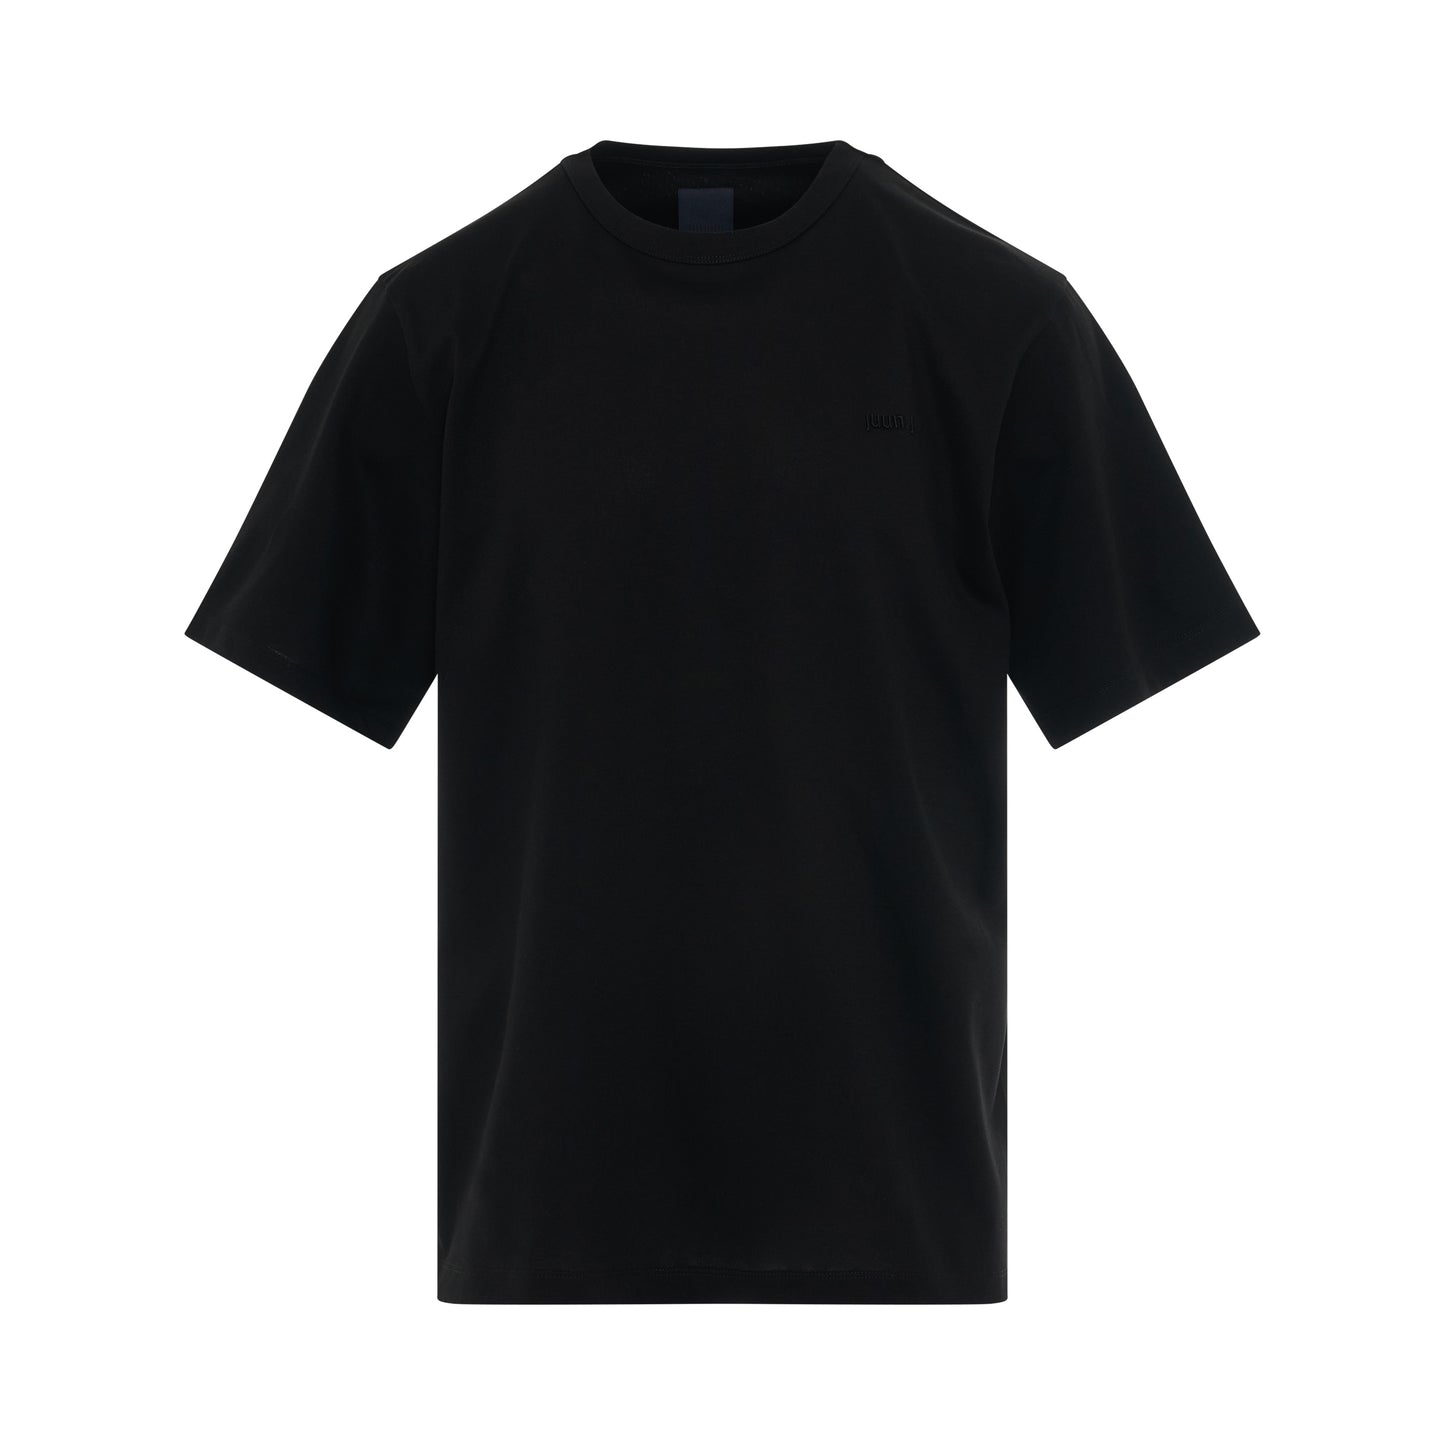 Graphic Loose Fit Half Sleeve T-Shirt in Black